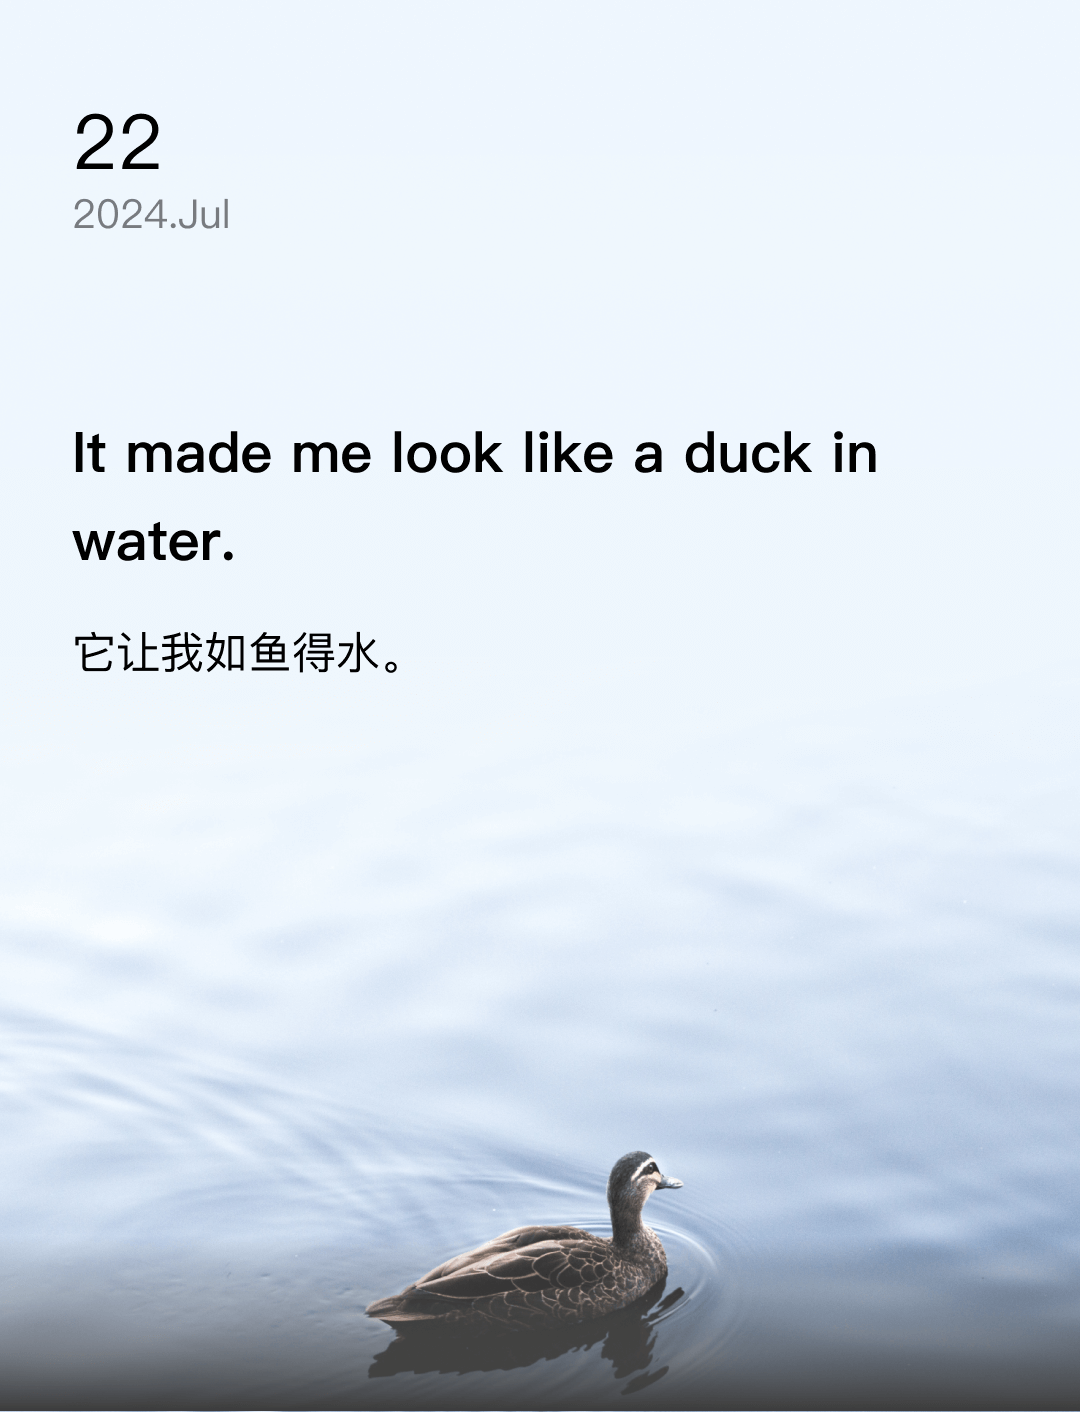 It made me look like a duck in water.